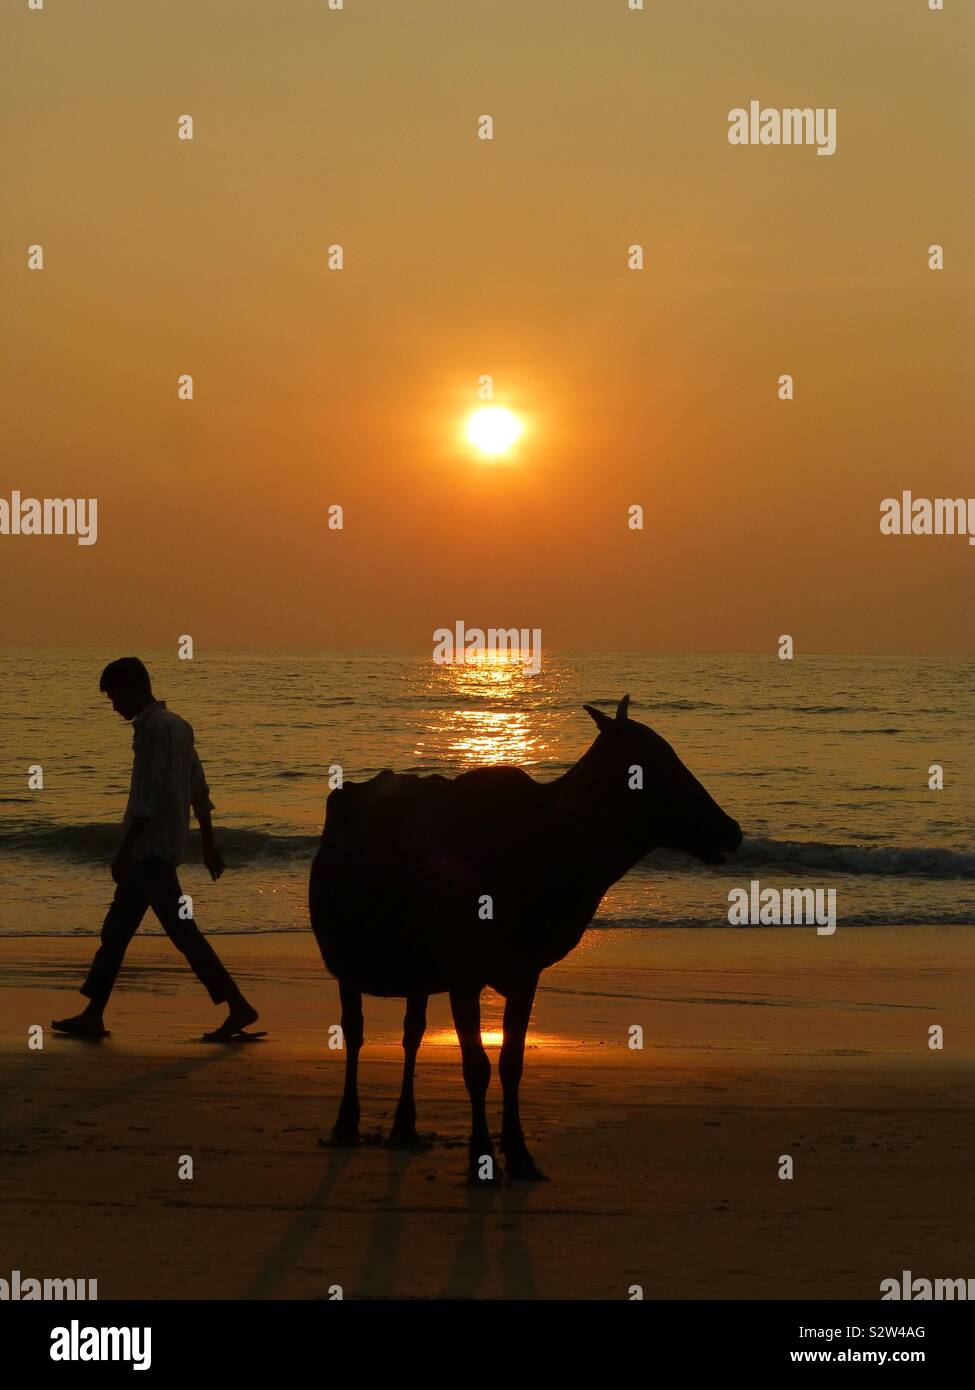 A man and a cow on the beach during an Indian sunset Stock Photo